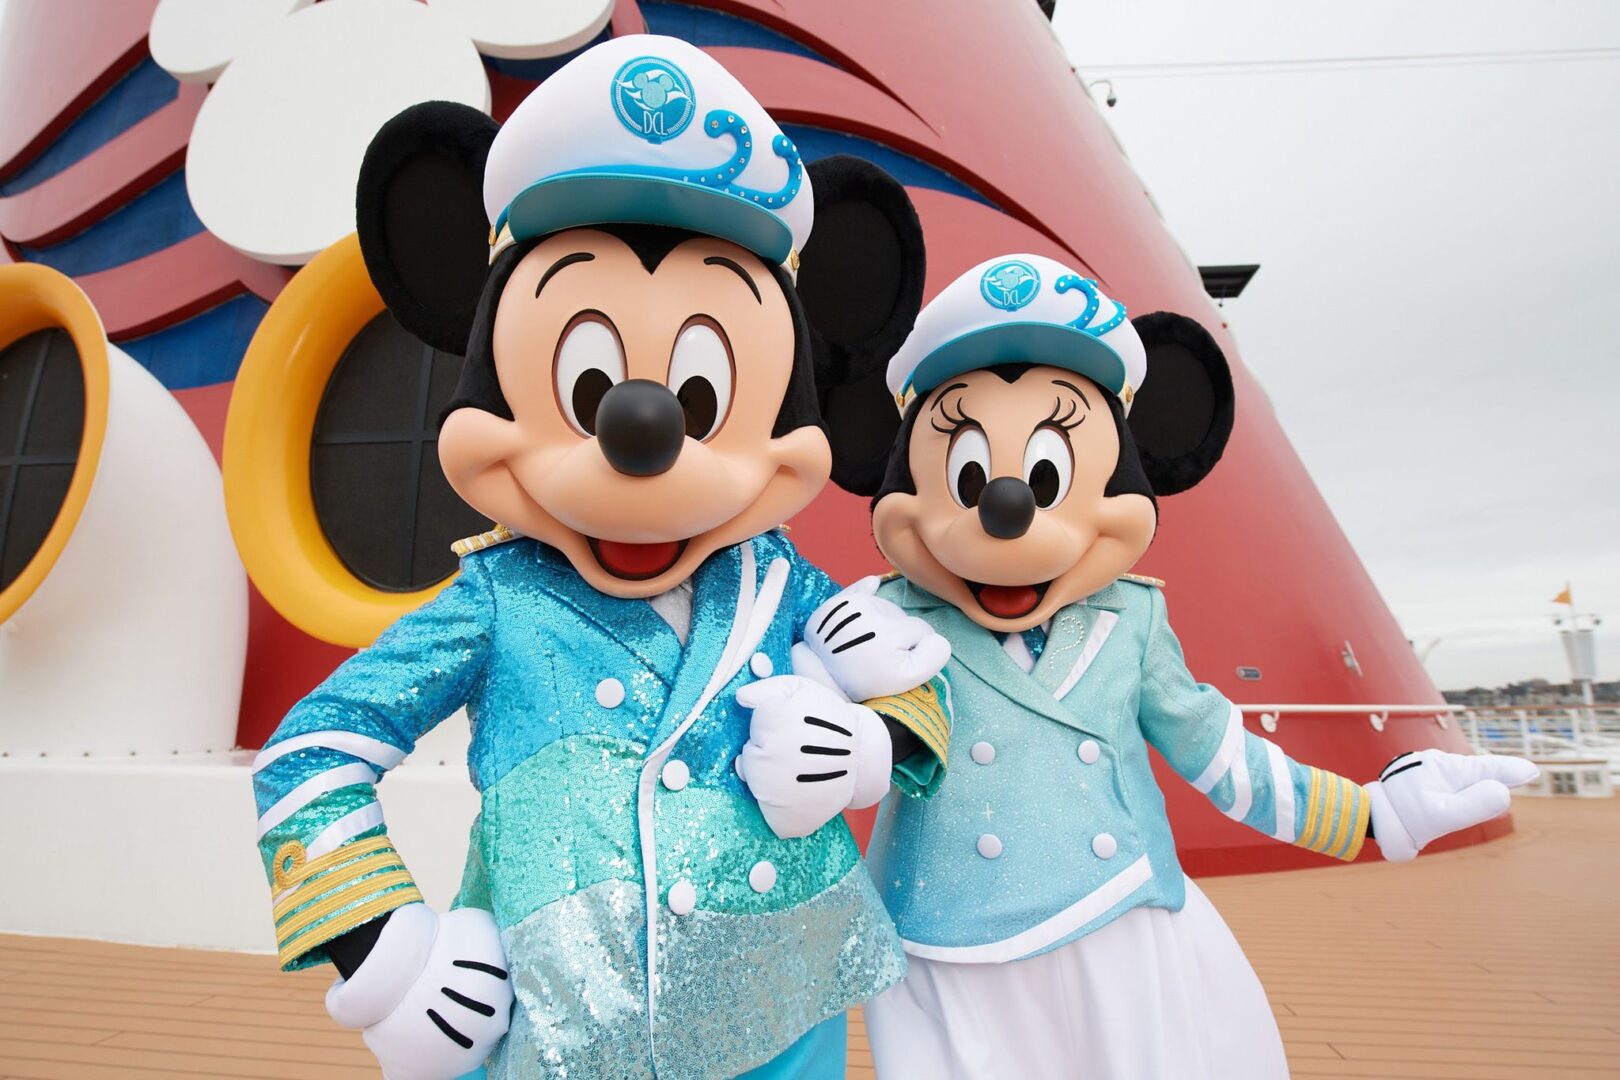 VIDEO: NEW “Silver Anniversary at Sea” Song Released in Honor of 25 Years of Disney Cruise Line